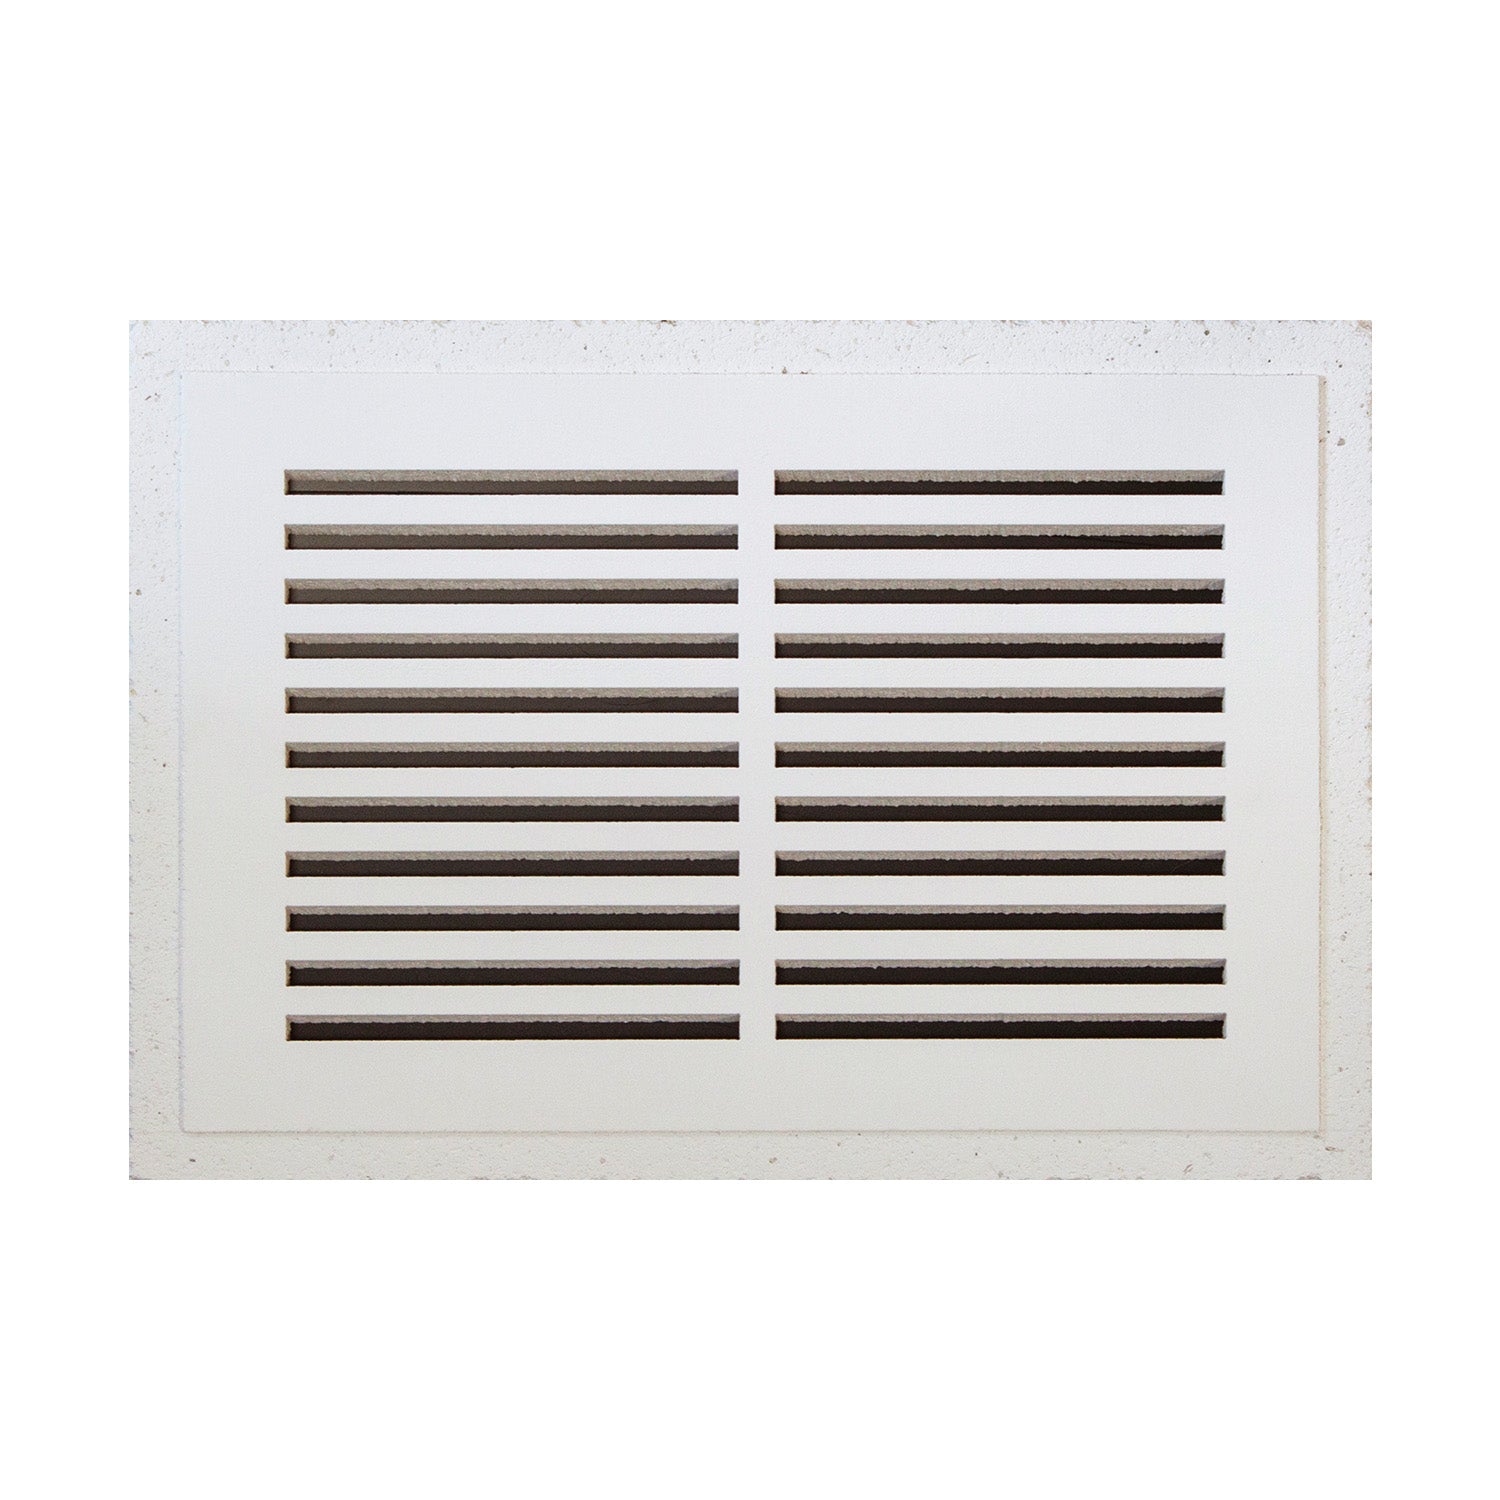 ENVISIVENT (CB5000) – Permanent Mud-In Flush Mounted Wall Air Return, 14” x 8” Duct